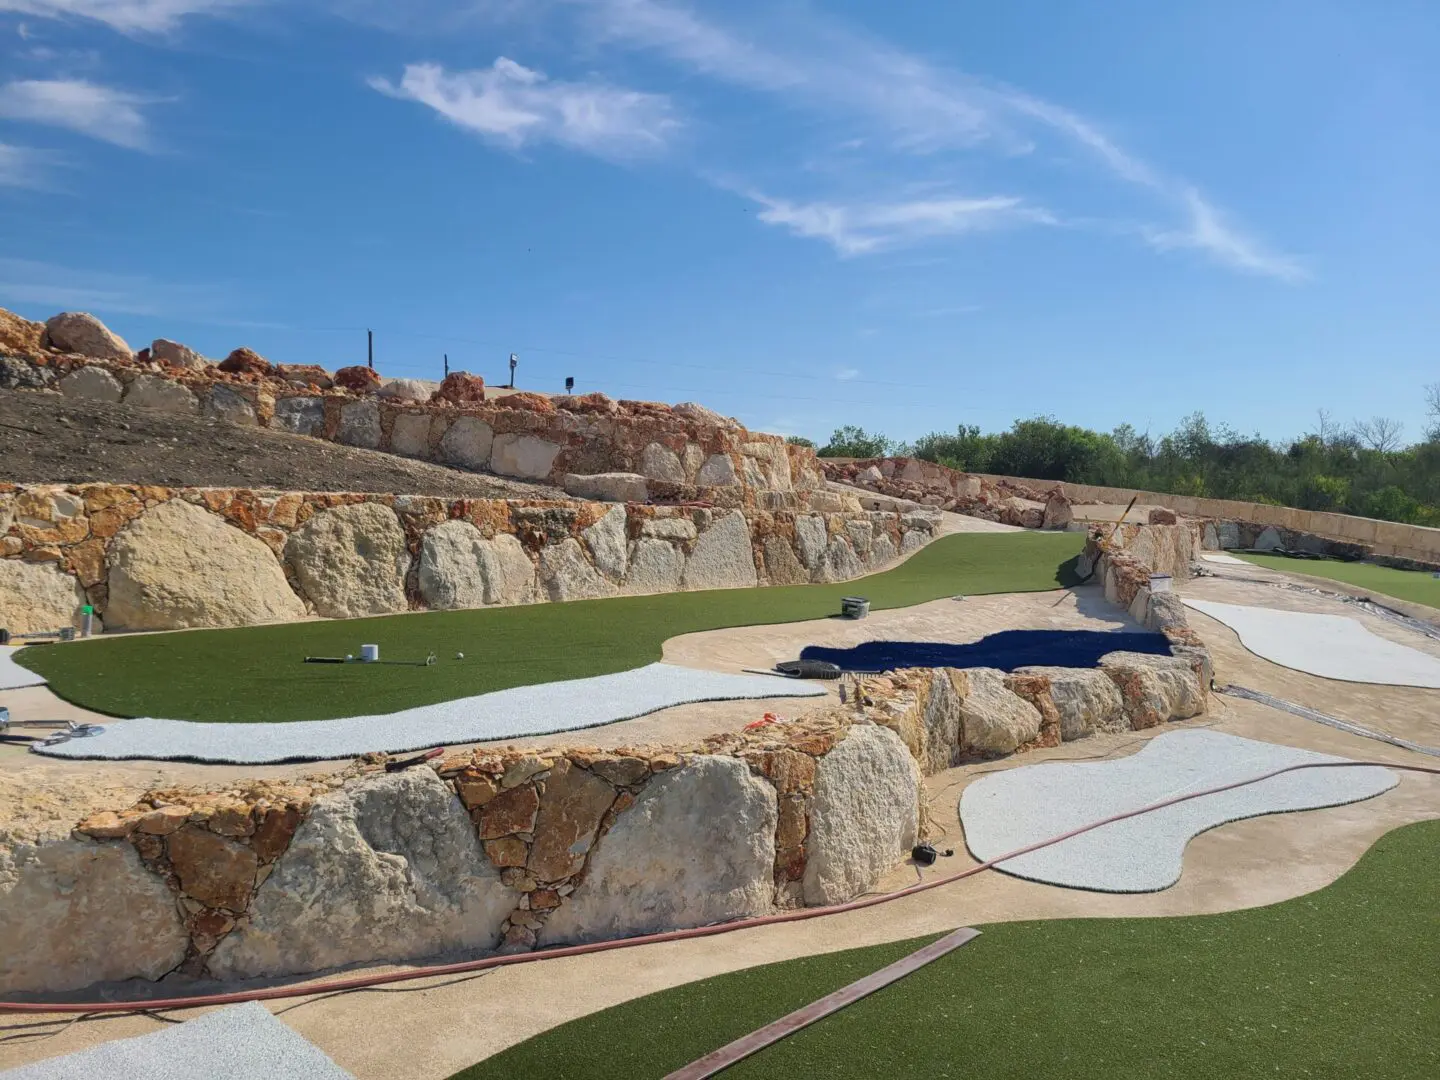 Close view of a mini golf course with rocks